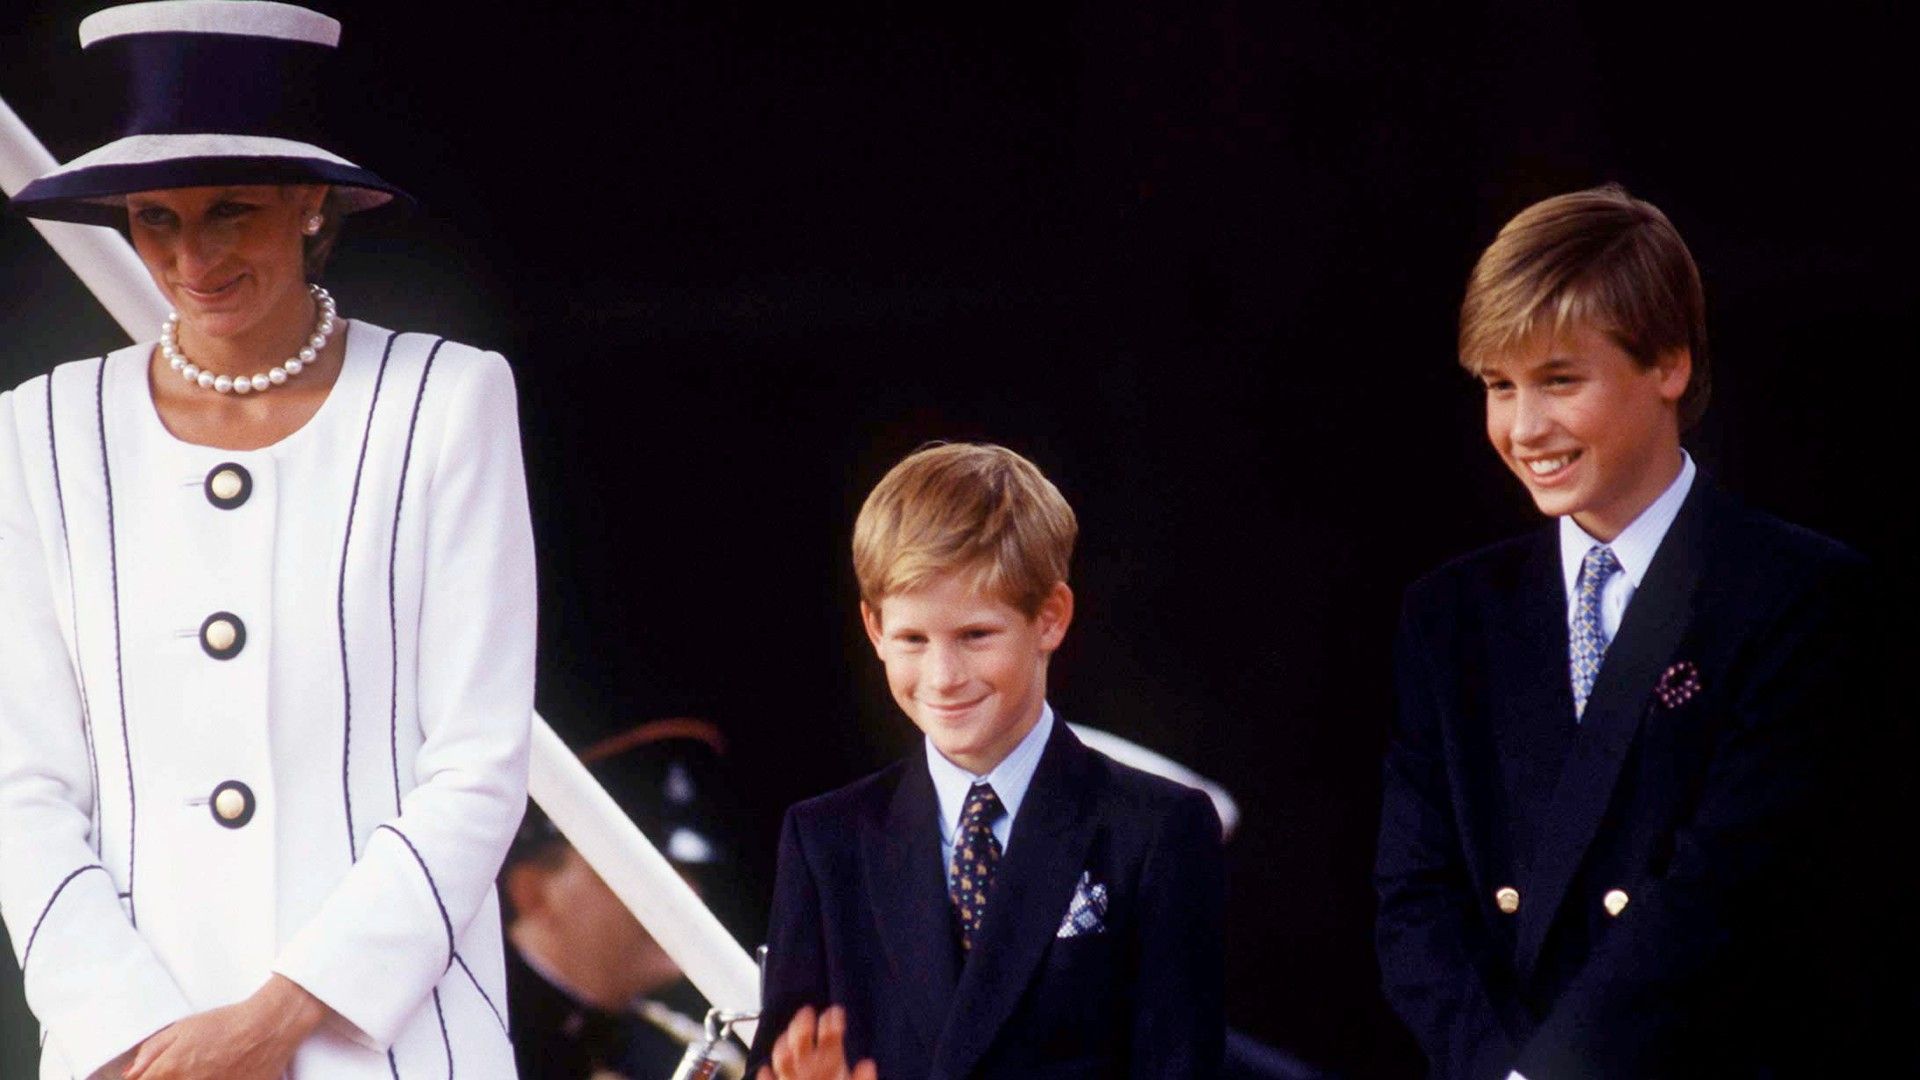 <p>                     While many royal children are brought up in a similar way, Diana was famously strict about parenting her sons Prince William and Prince Harry in her own way.                   </p>                                      <p>                     She typically resisted too much influence from the royal family, and was instead clear on parenting her boys as<em> she</em> saw fit – for example, doing the school run herself whenever she could, choosing her own royal nanny, and selecting their schools and clothing herself.                   </p>                                      <p>                     In her famous 1995 <em>Panorama</em> interview with Martin Bashir, Diana also shared that she was making a point to introduce her sons to experiences that royal children don’t usually have.                   </p>                                      <p>                     She explained, "Well, with William and Harry, for instance, I take them round homelessness projects, I've taken William and Harry to people dying of AIDS – albeit I told them it was cancer – I've taken the children to all sorts of areas where I'm not sure anyone of that age in this family has been before.                   </p>                                      <p>                     "I want them to have an understanding of people's emotions, people's insecurities, people's distress, and people's hopes and dreams," Diana said.                   </p>